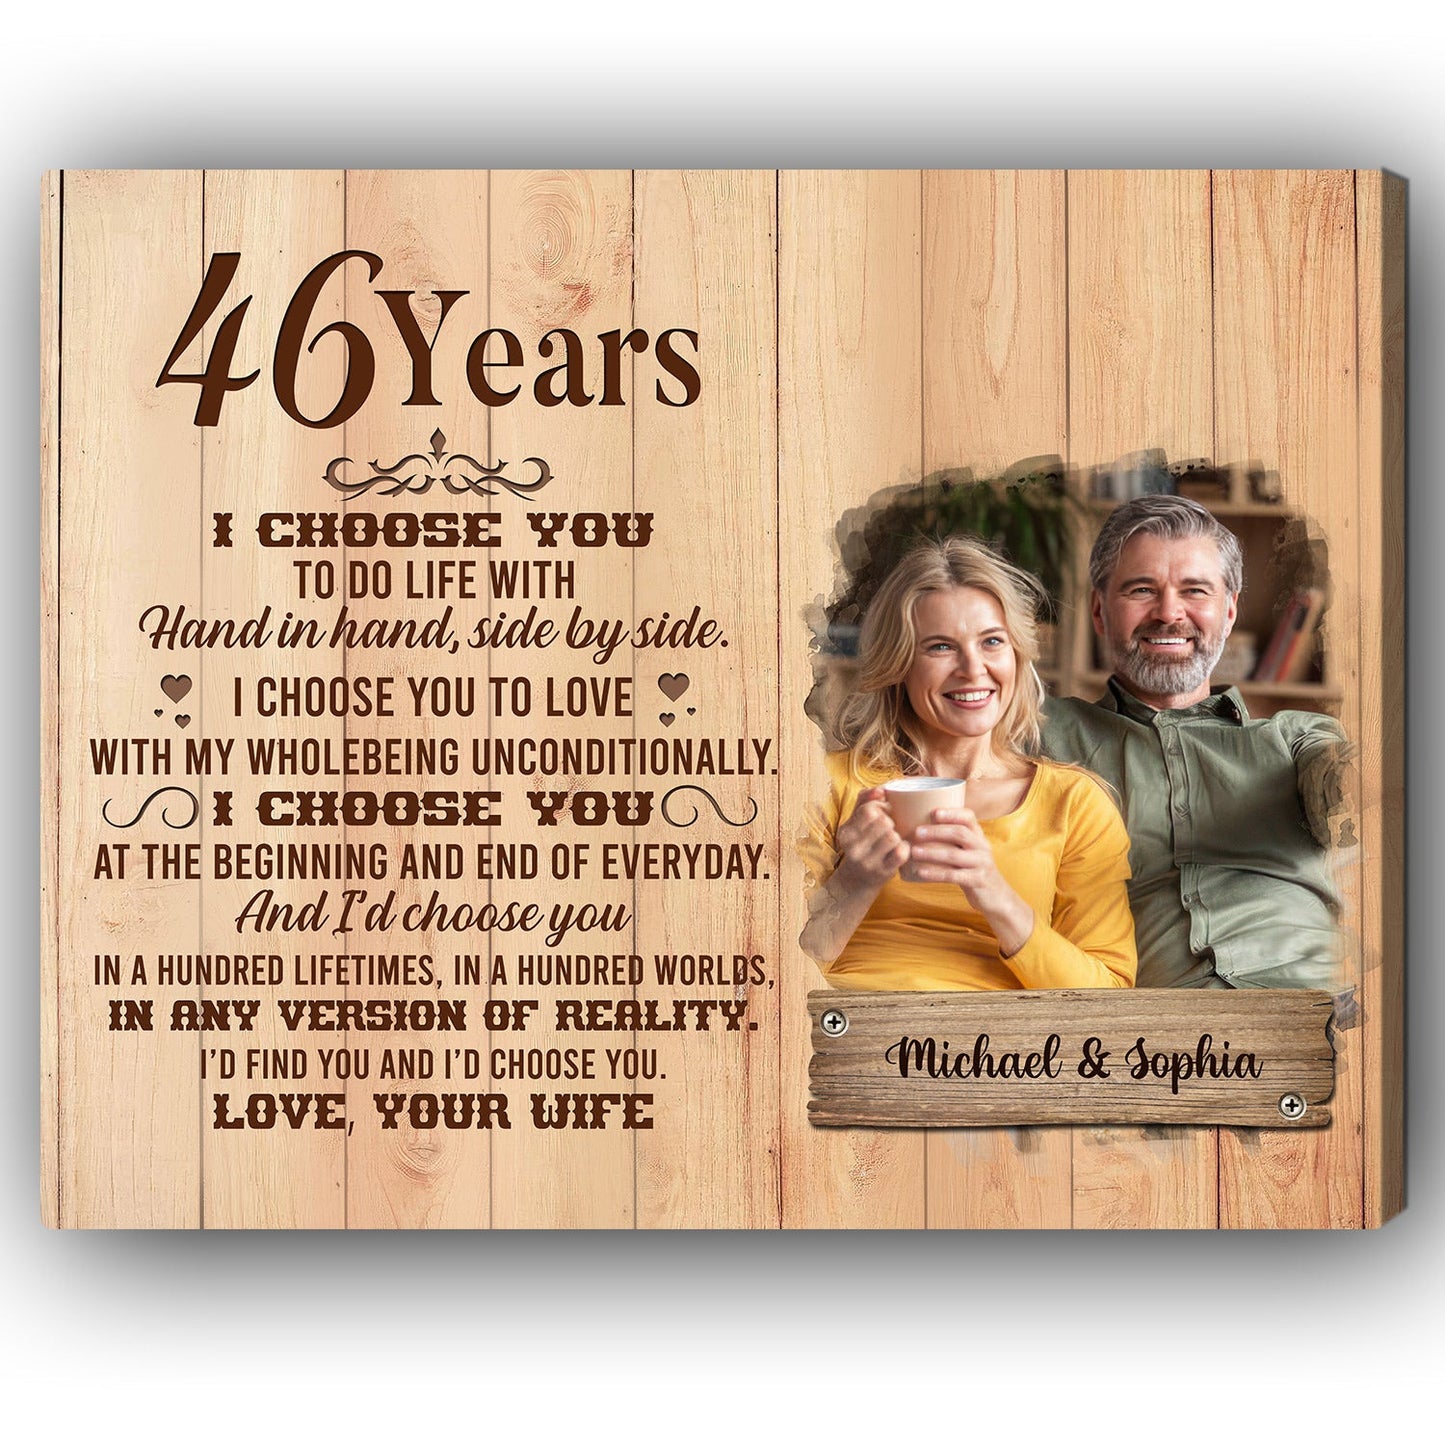 41 Years - Personalized 41 Year Anniversary gift For Parents, Husband or Wife - Custom Canvas Print - MyMindfulGifts